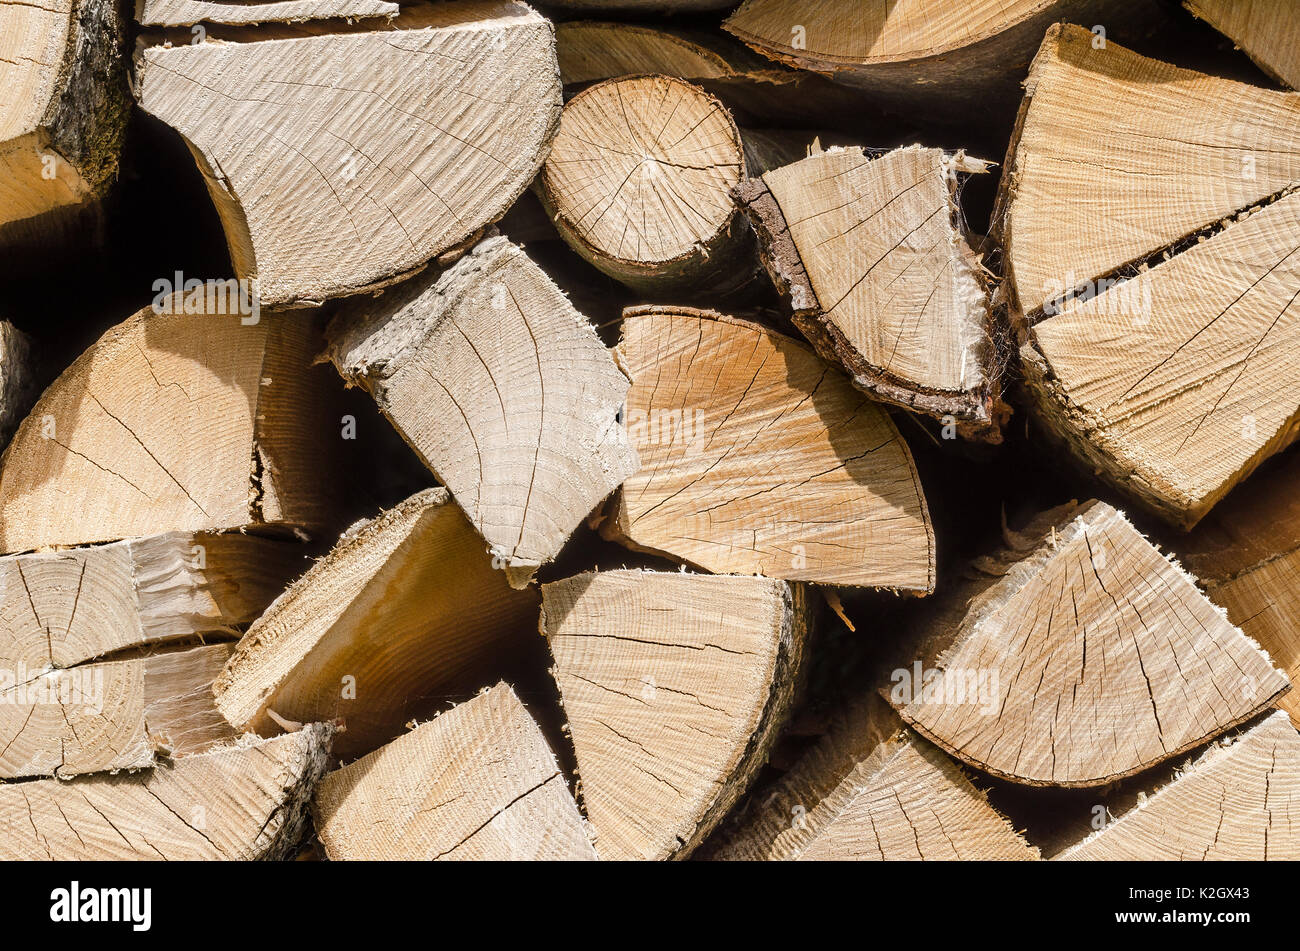 Splitted, dried and stacked firewood, horizontal front view. Stack of weathered, dry wood, a source of energy. Photo. Stock Photo